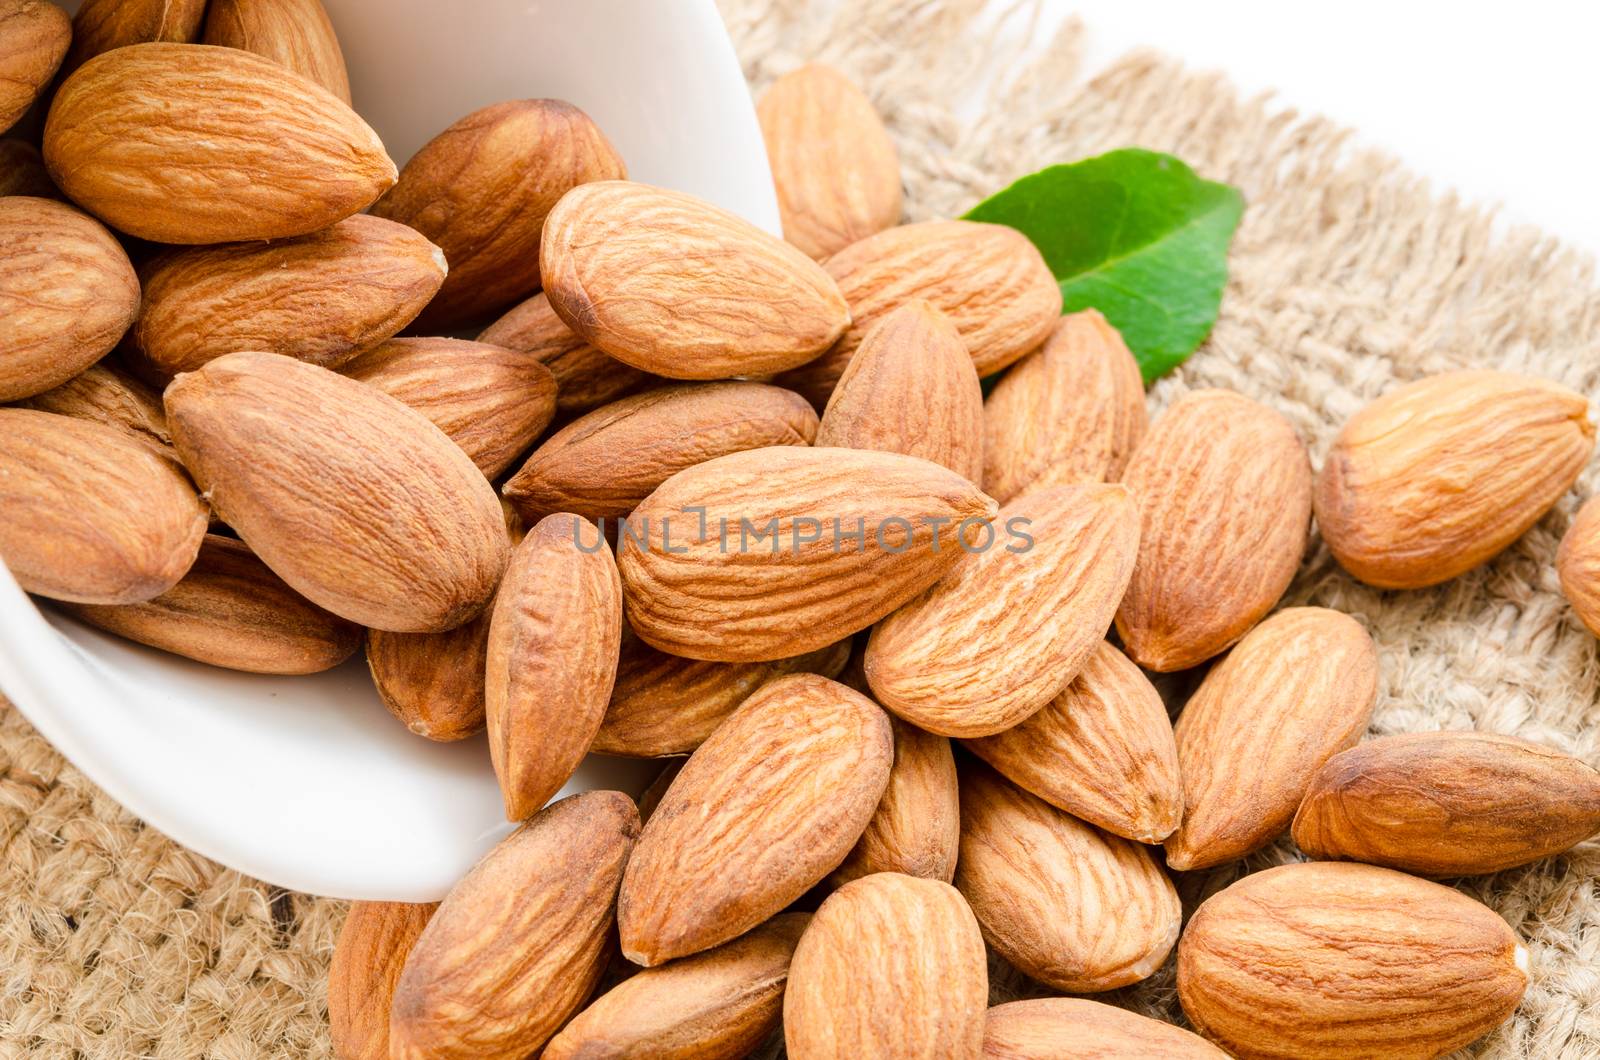 Almonds in white bowl with green leaf on sack.